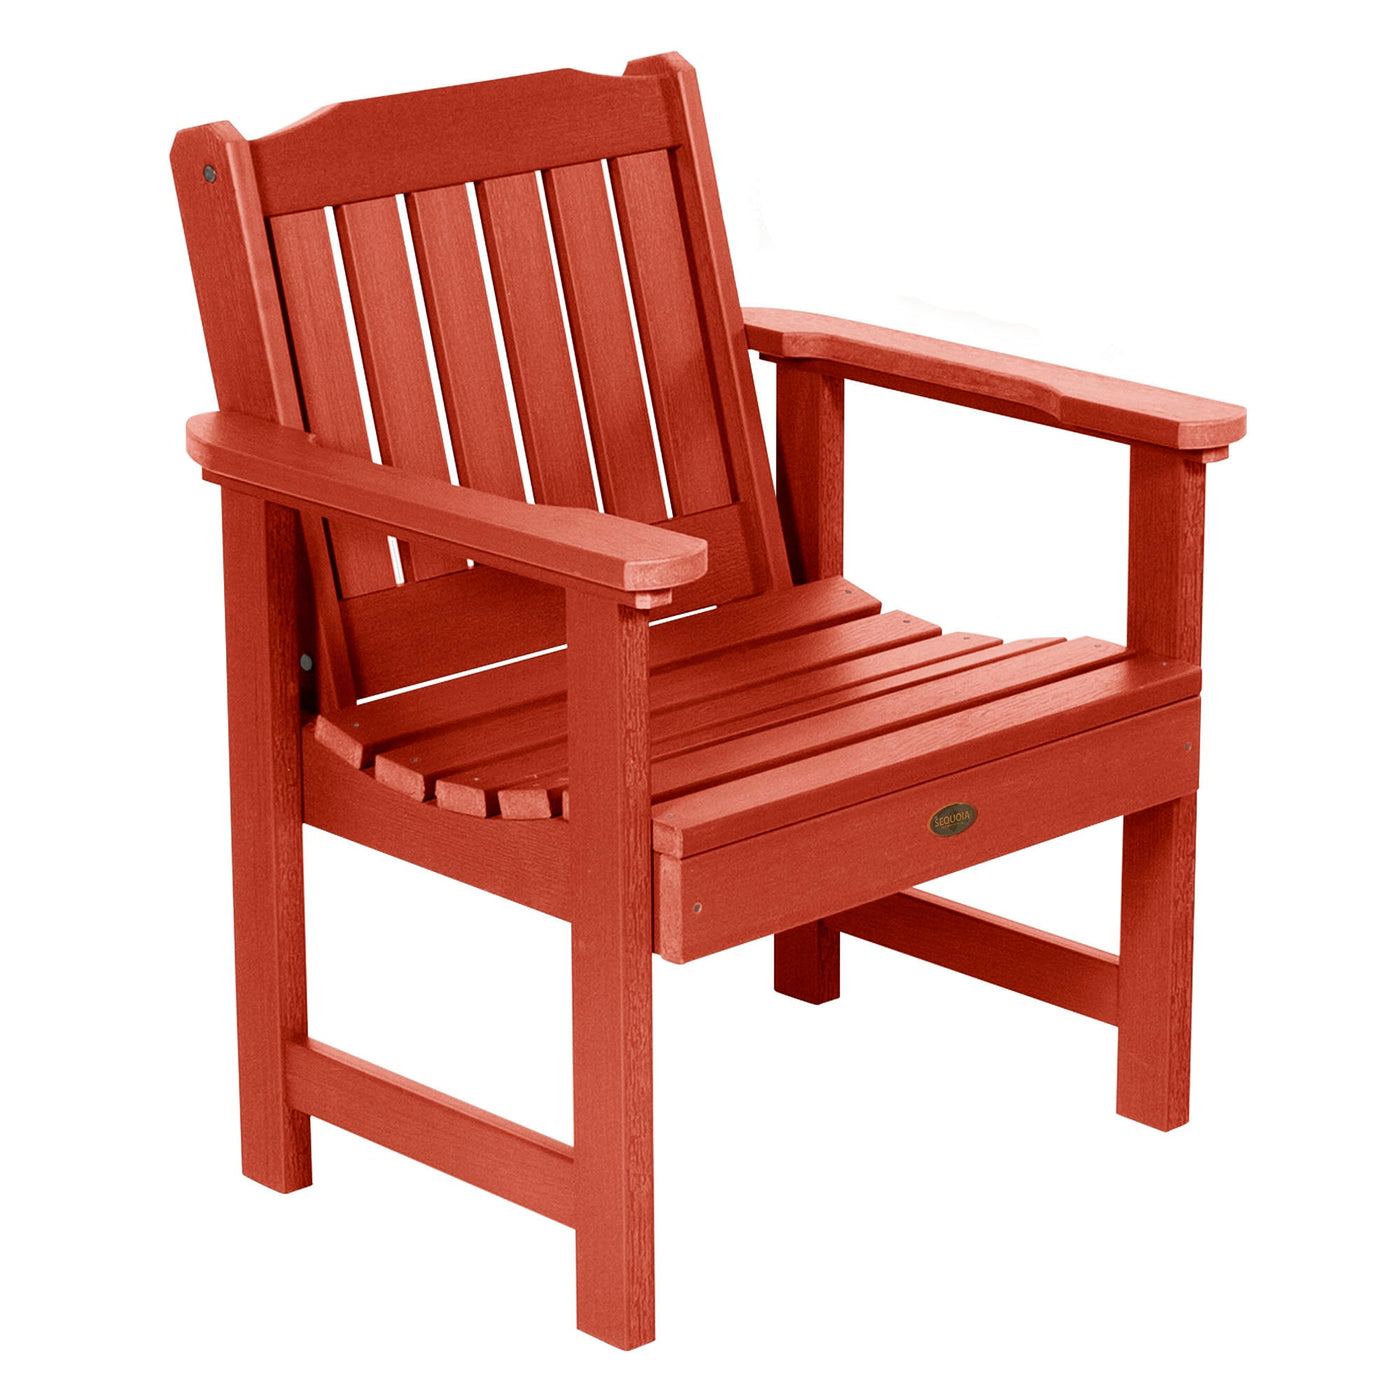 Commercial Grade "Springville" Lounge Chair Sequoia Professional Rustic Red 